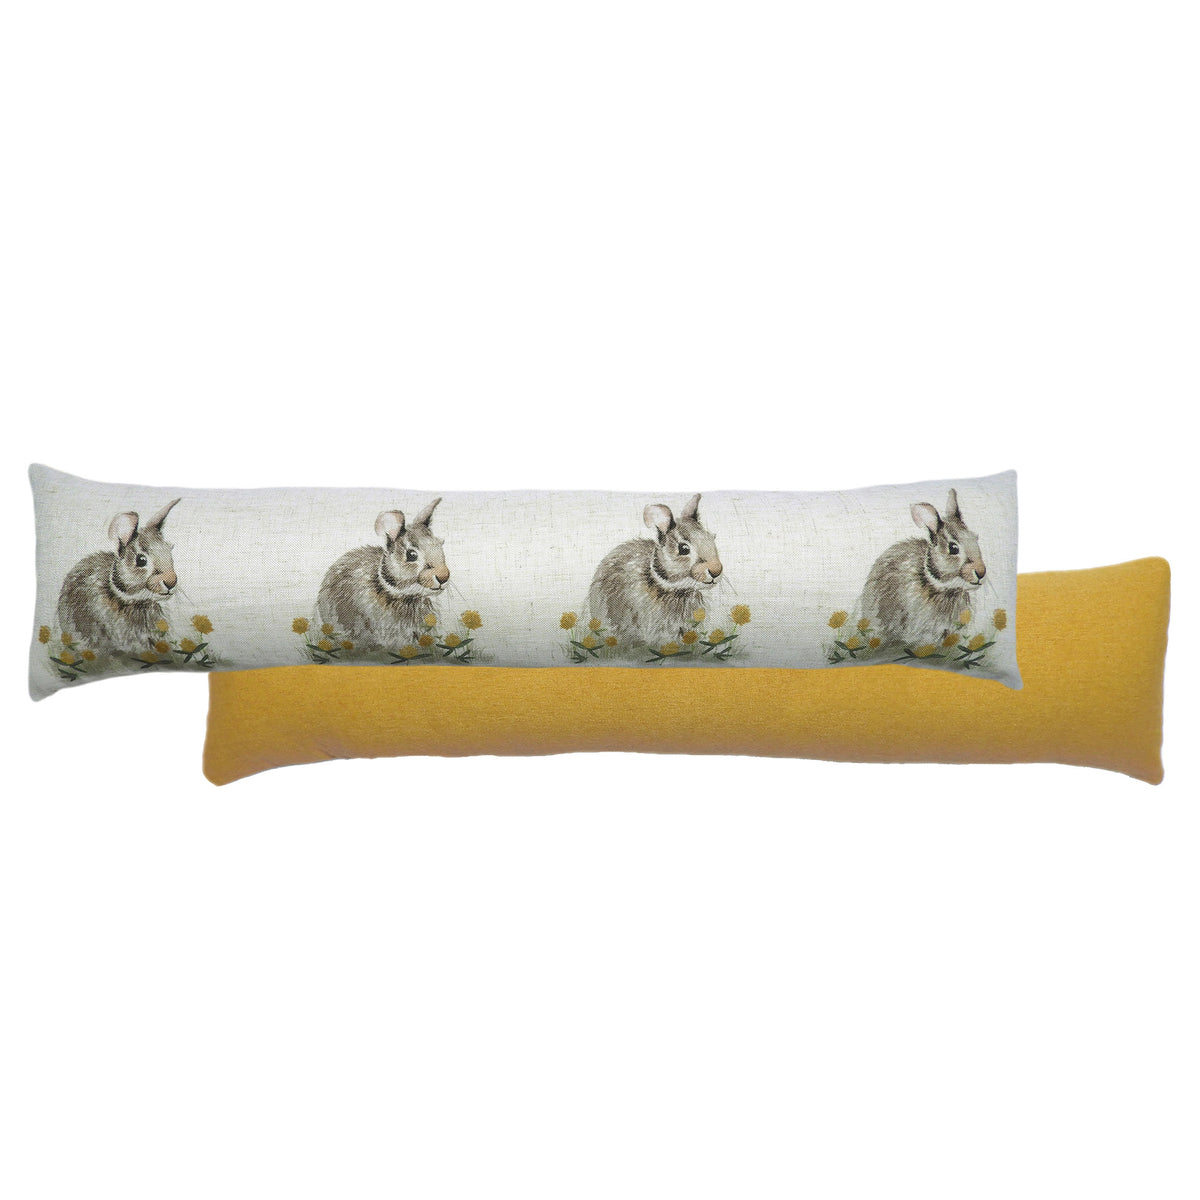 Ozeil Country hare draught excluder from Roseland